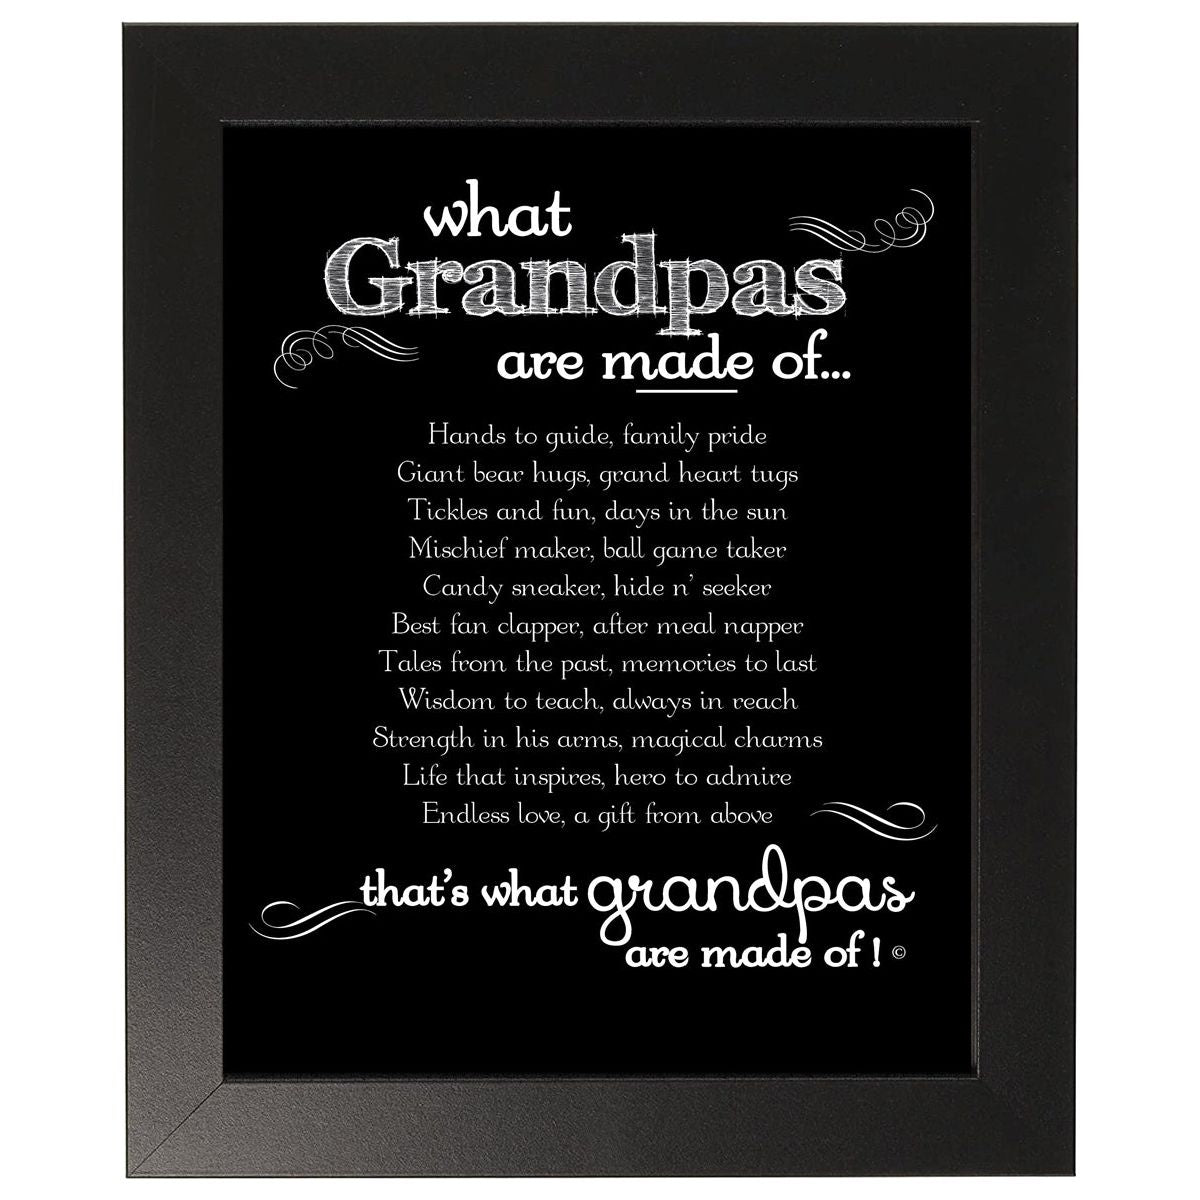 Black 8"x10" frame with "What Grandpas are Made of..." poem